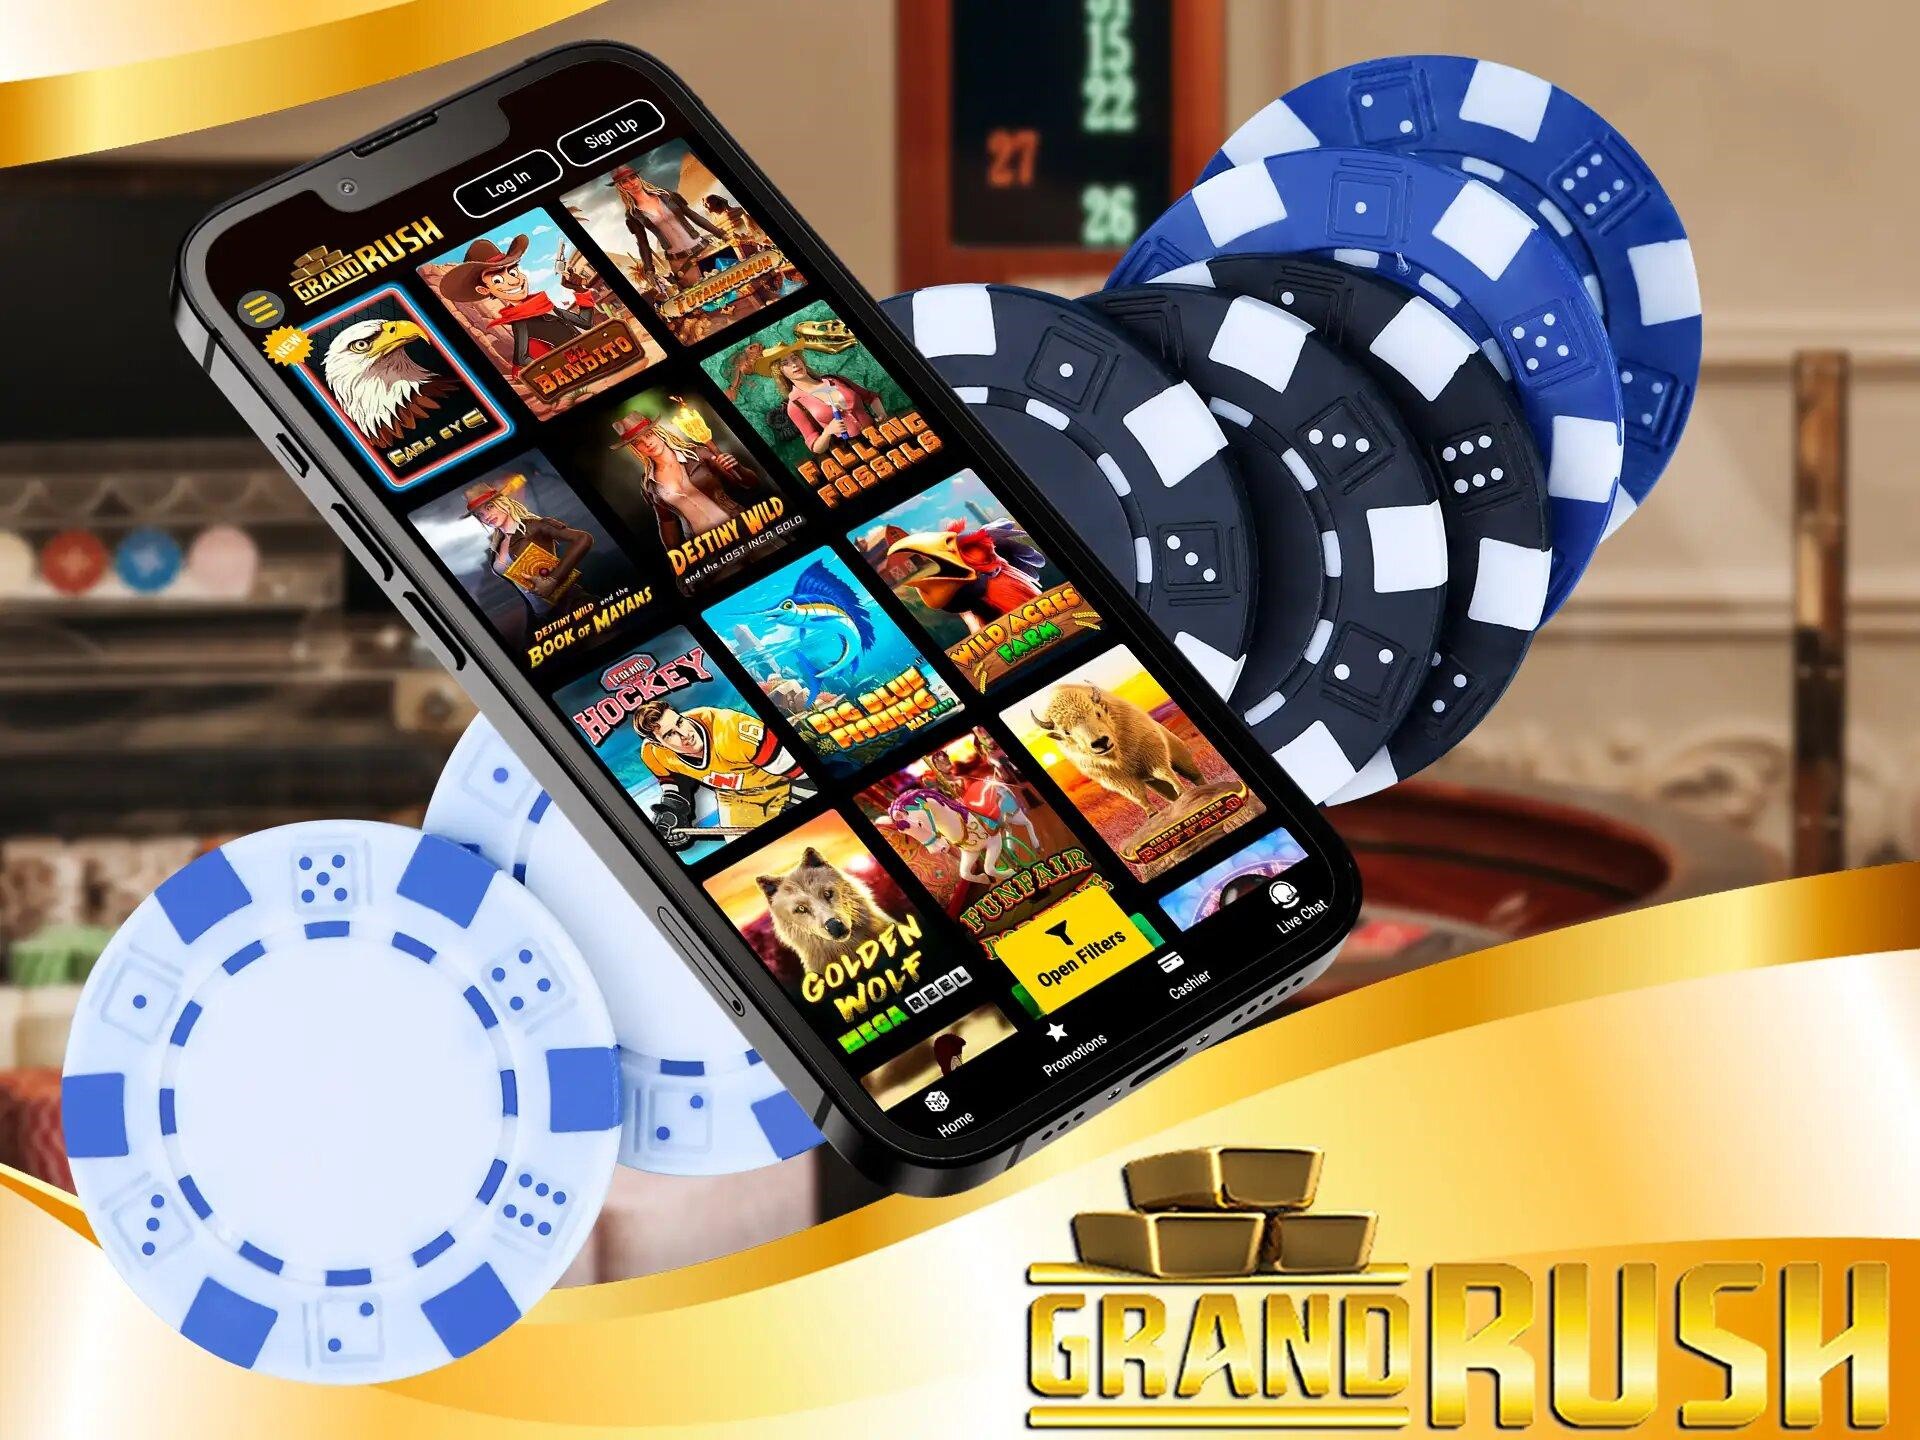 Overview of Table Games at the Grand Rush in Australia